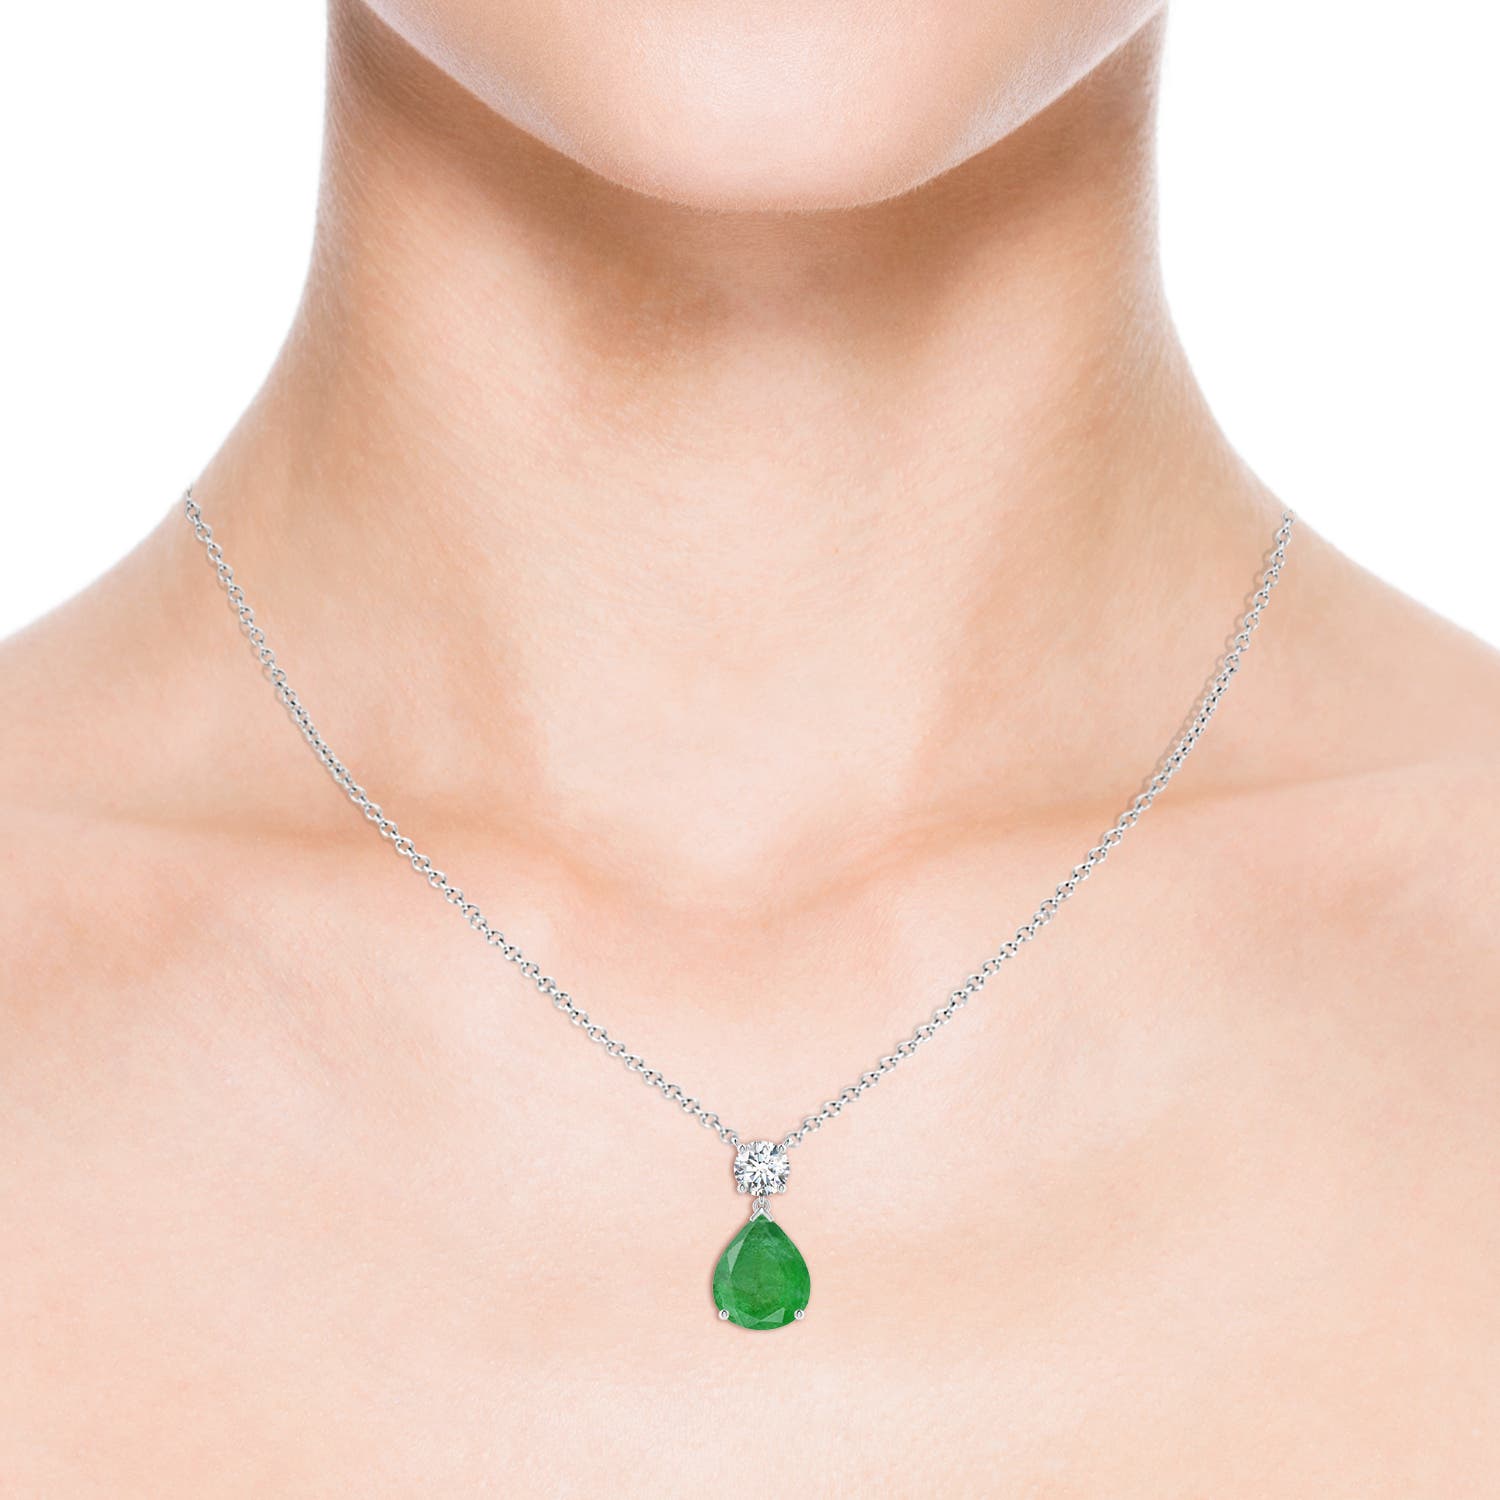 A - Emerald / 5.21 CT / 18 KT White Gold